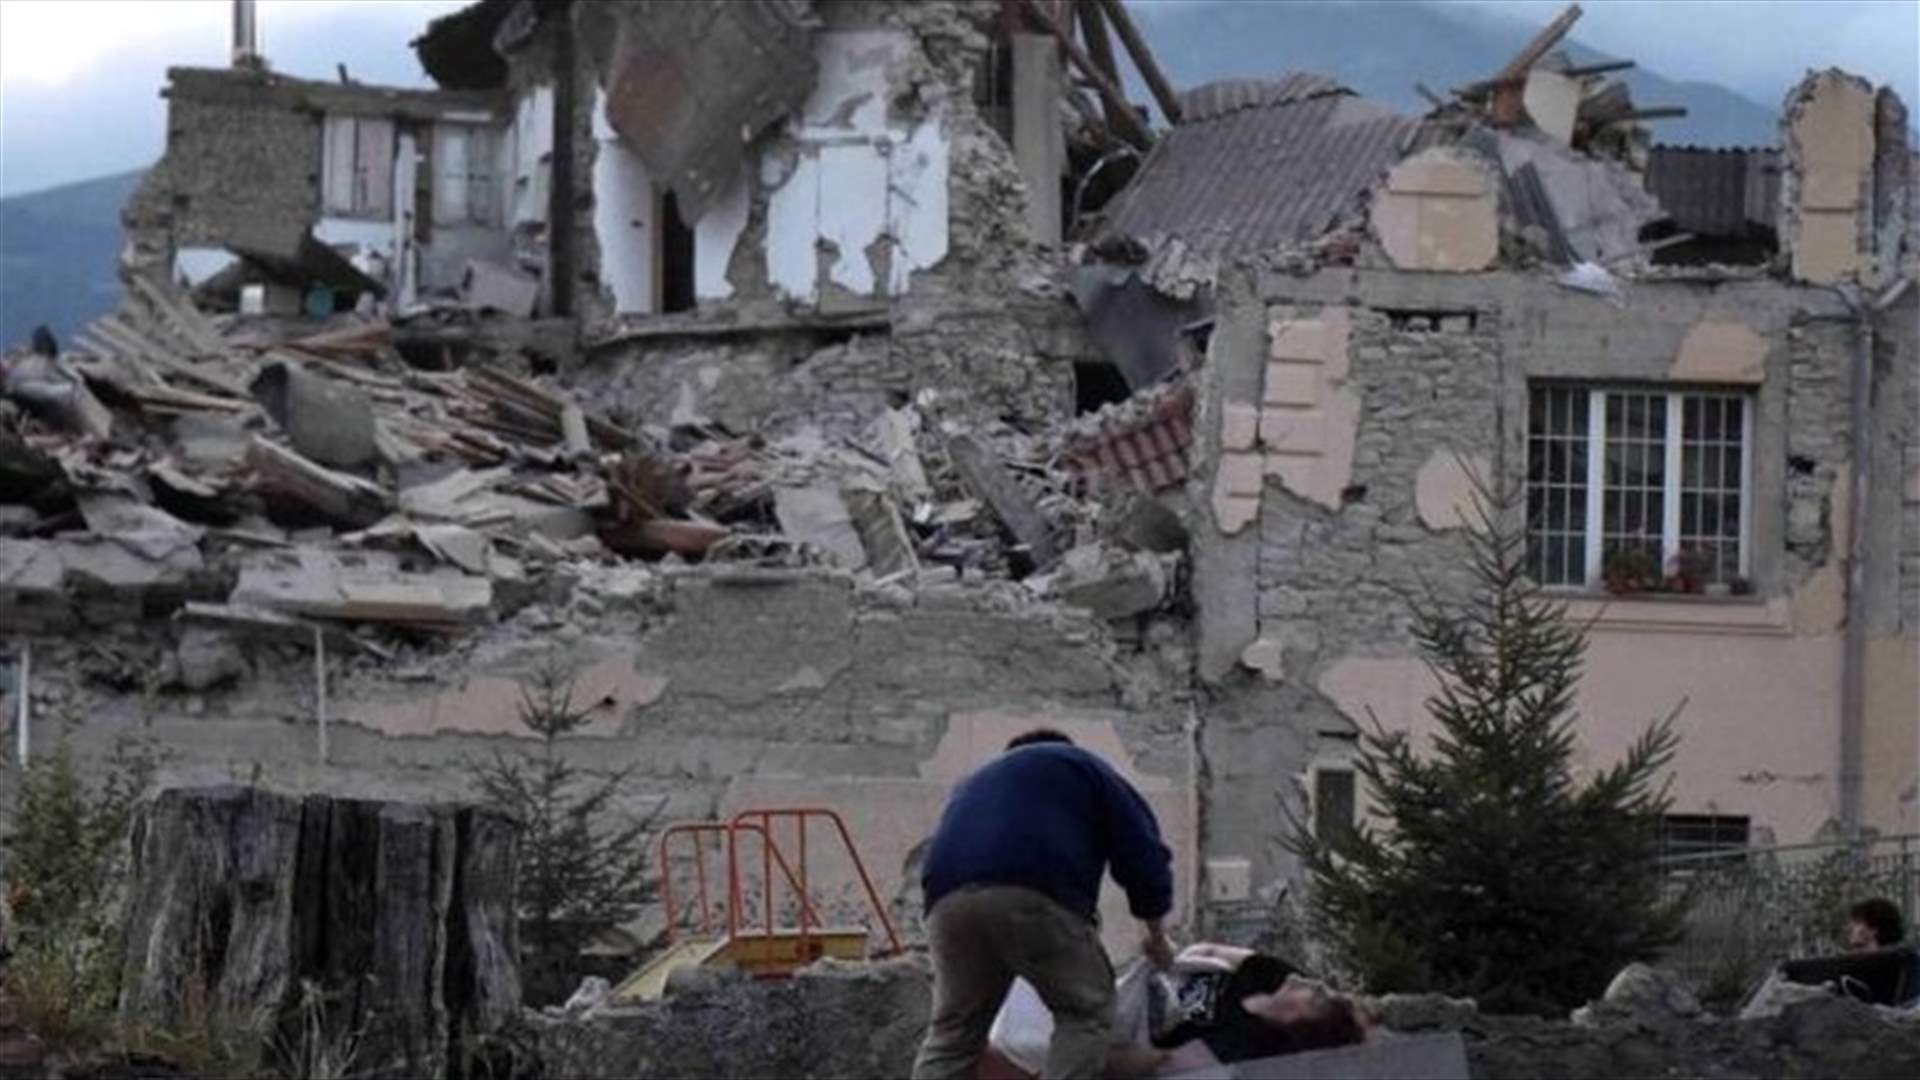 Number of dead in Italy quake climbs, first funerals to be held